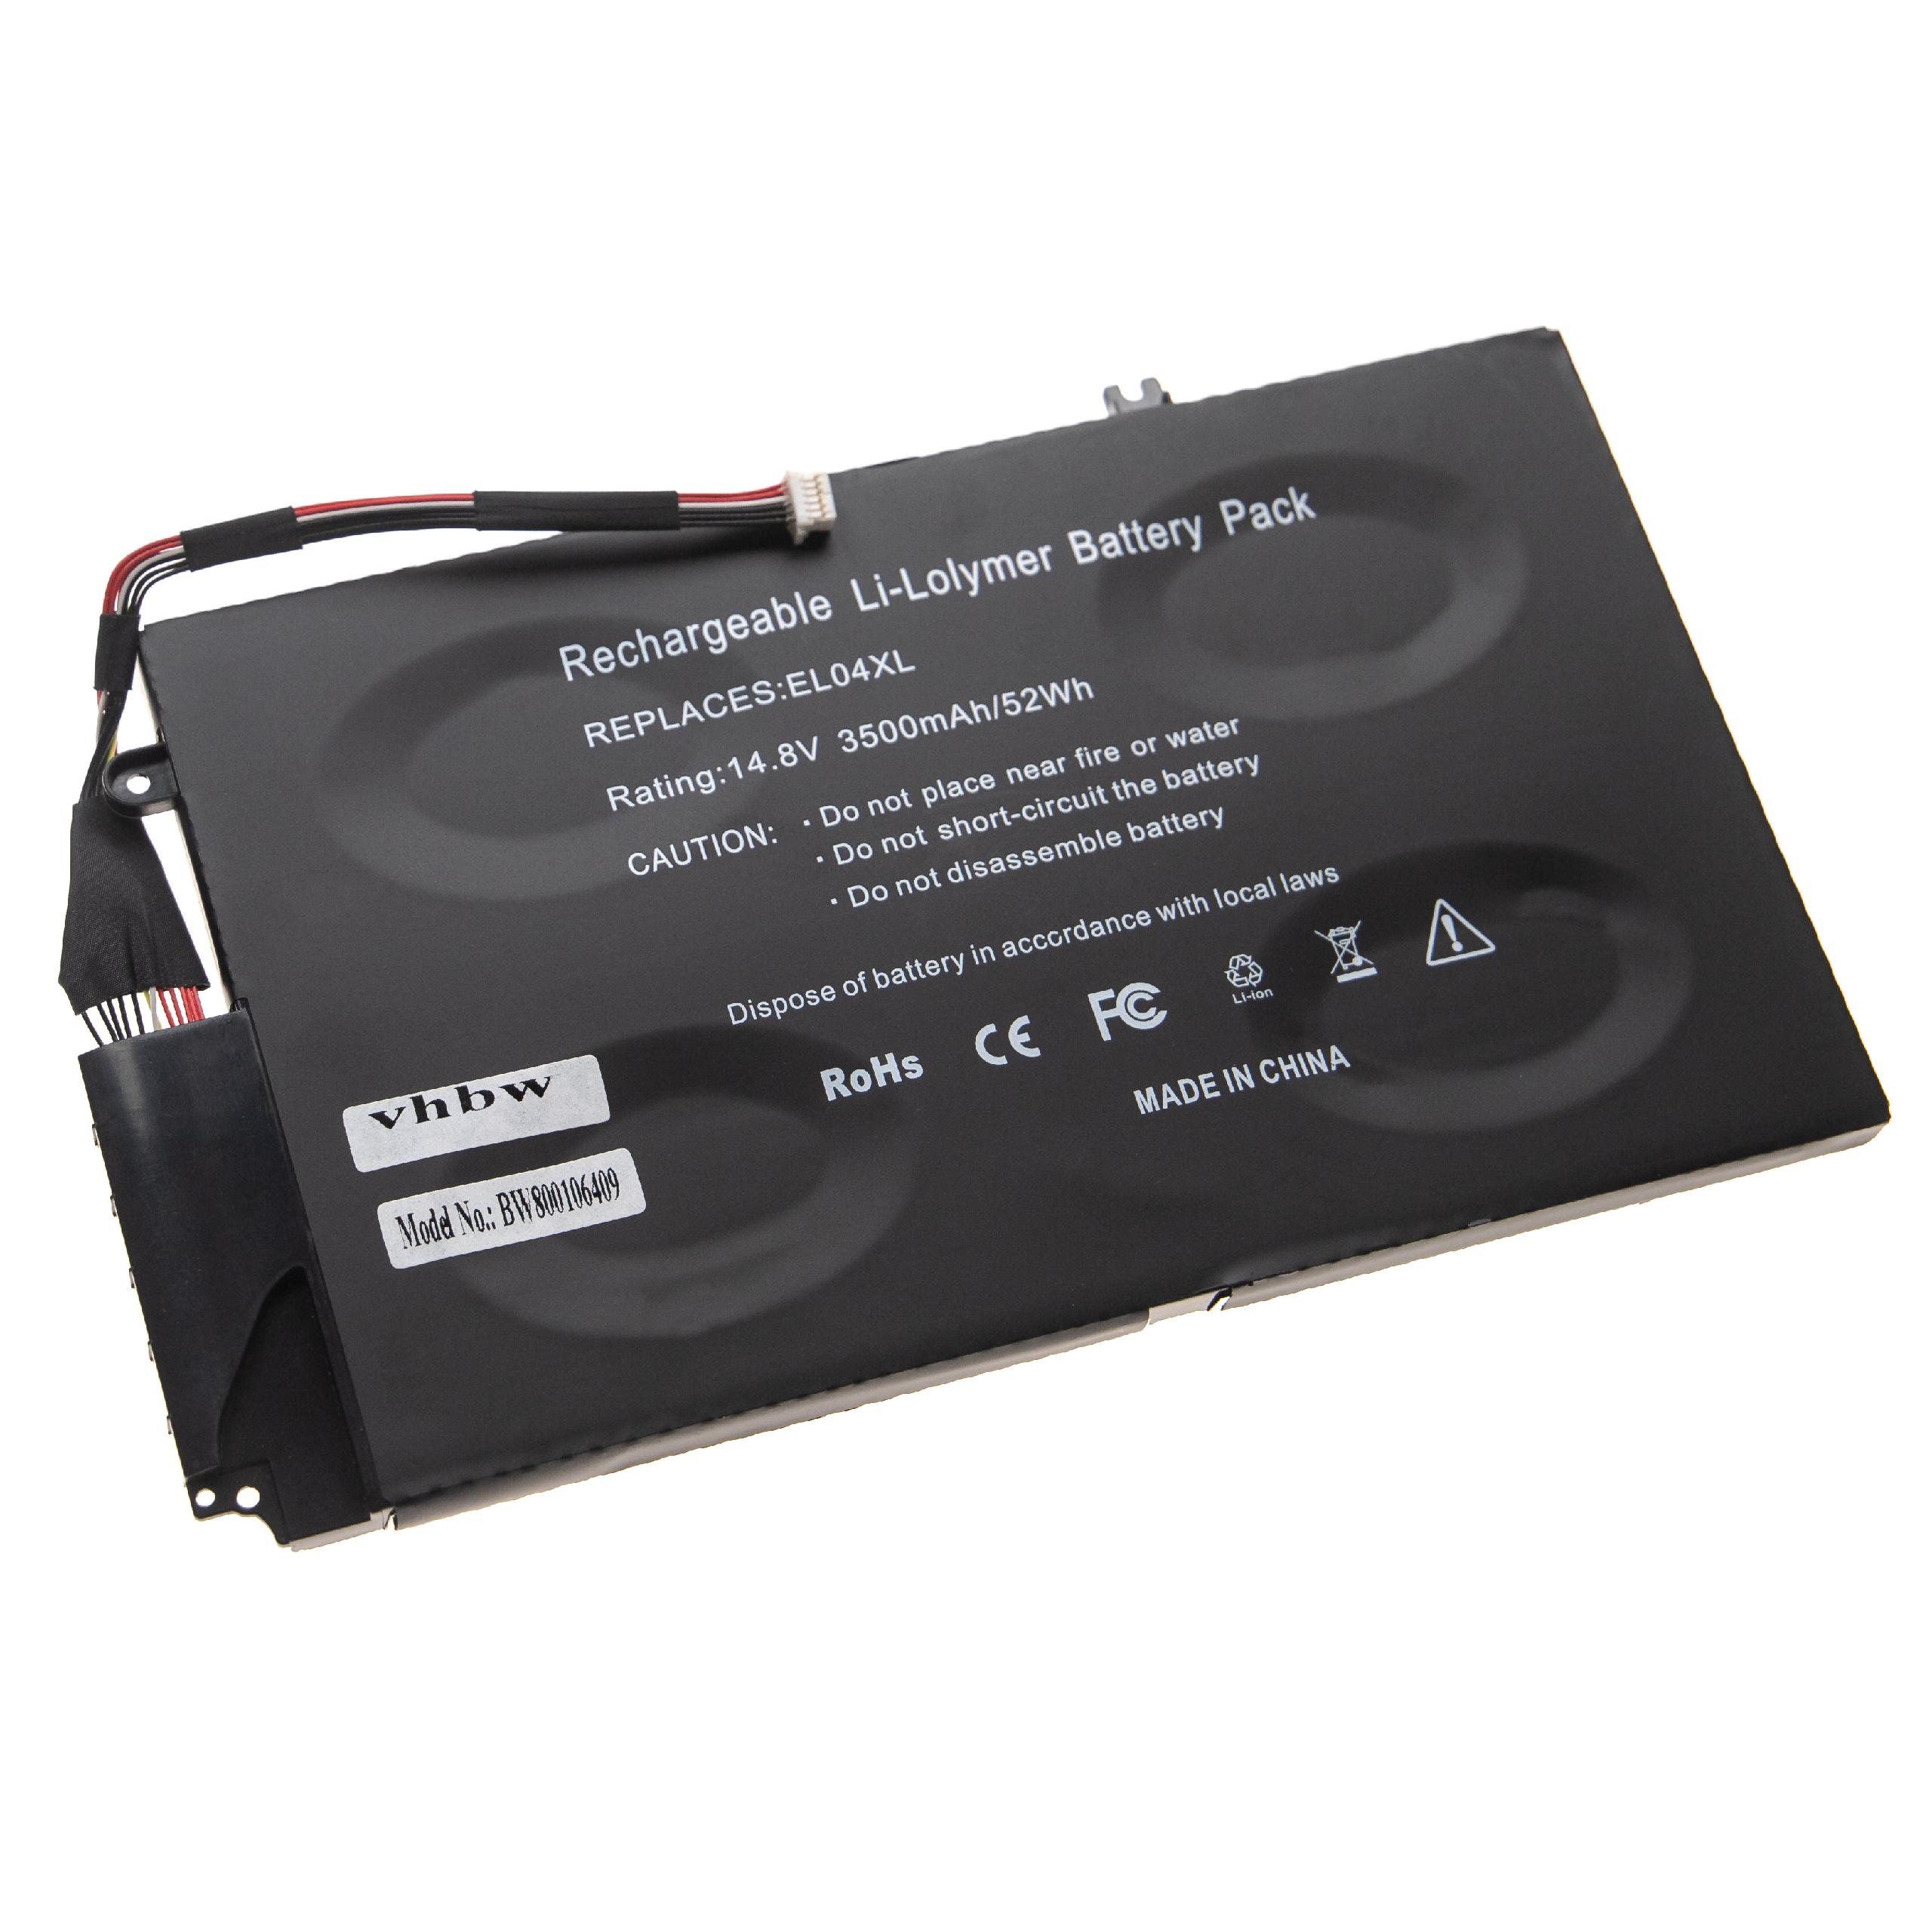 Notebook Battery Replacement for HP 681879-121, 681879-171, 681879-1C1 - 3500mAh 14.8V Li-polymer, black